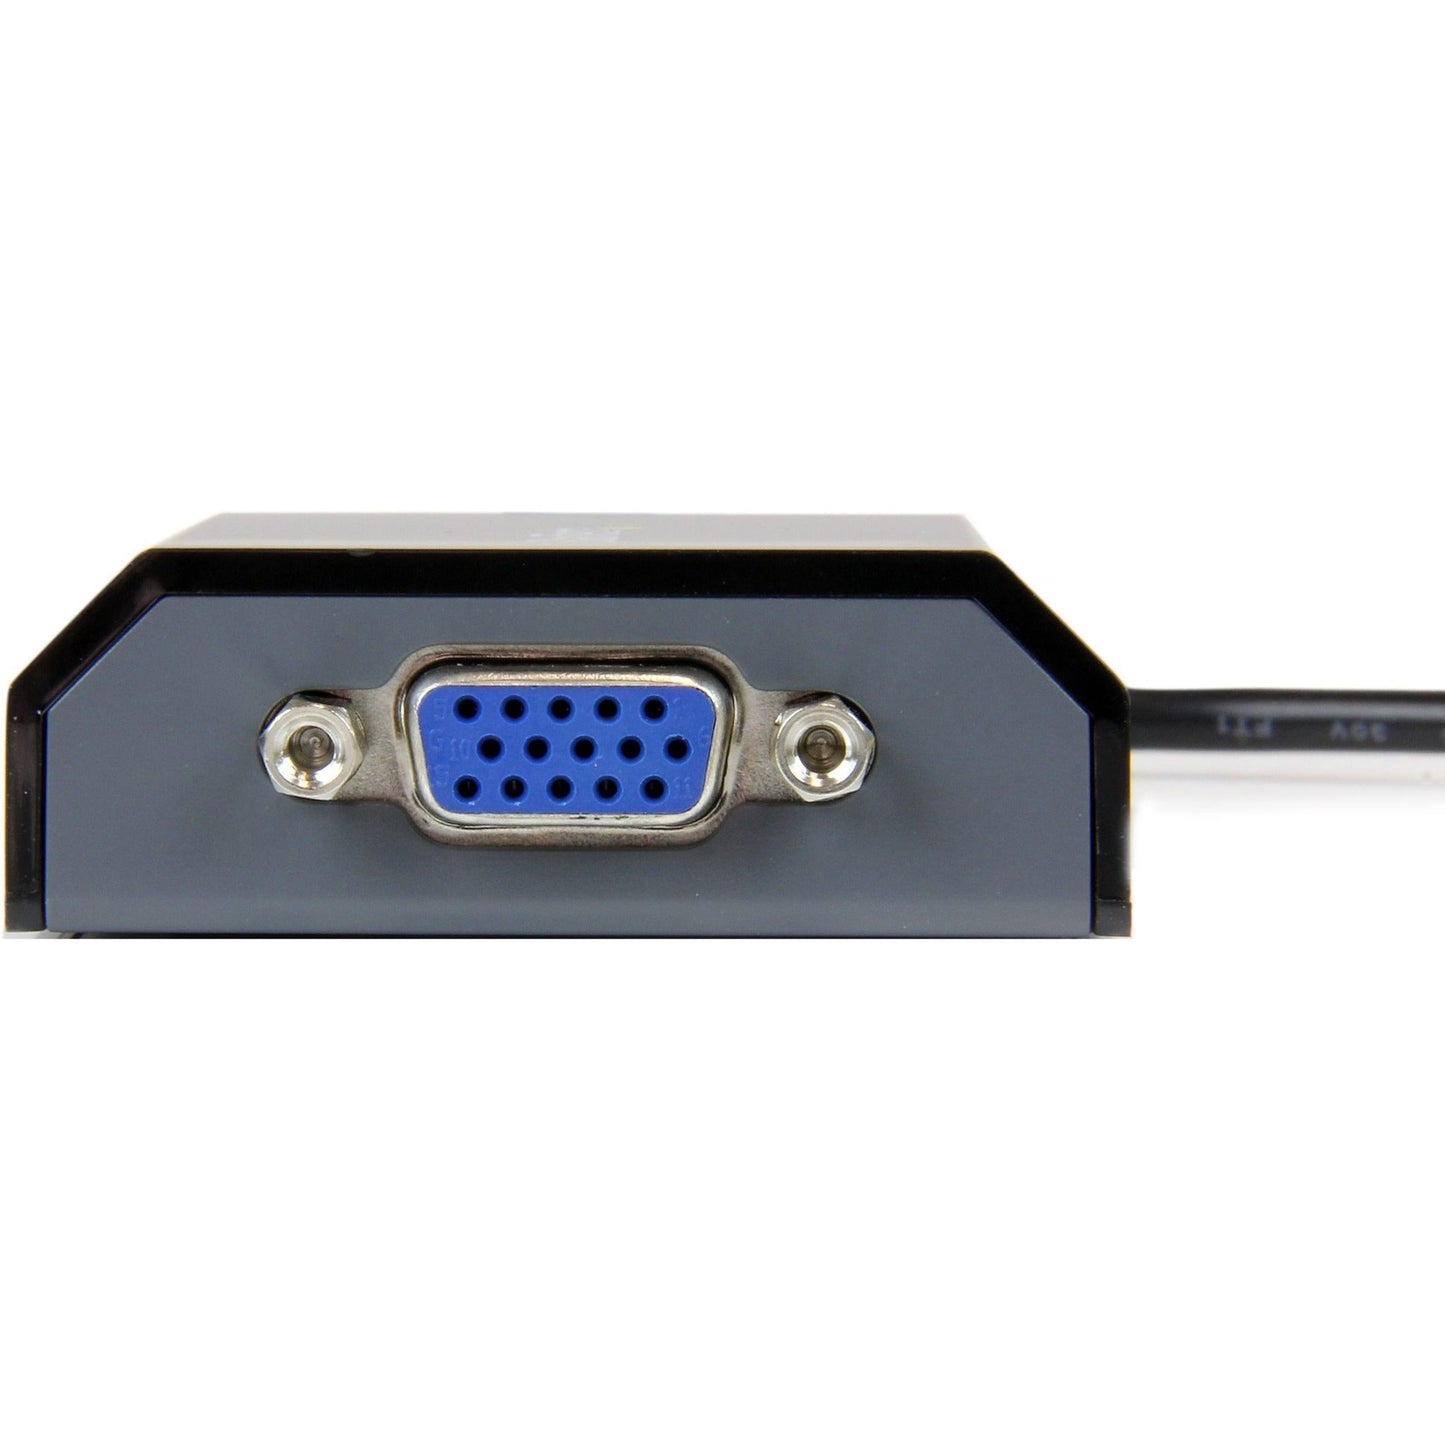 StarTech.com USB to VGA Adapter - External USB Video Graphics Card for PC and MAC- 1920x1200